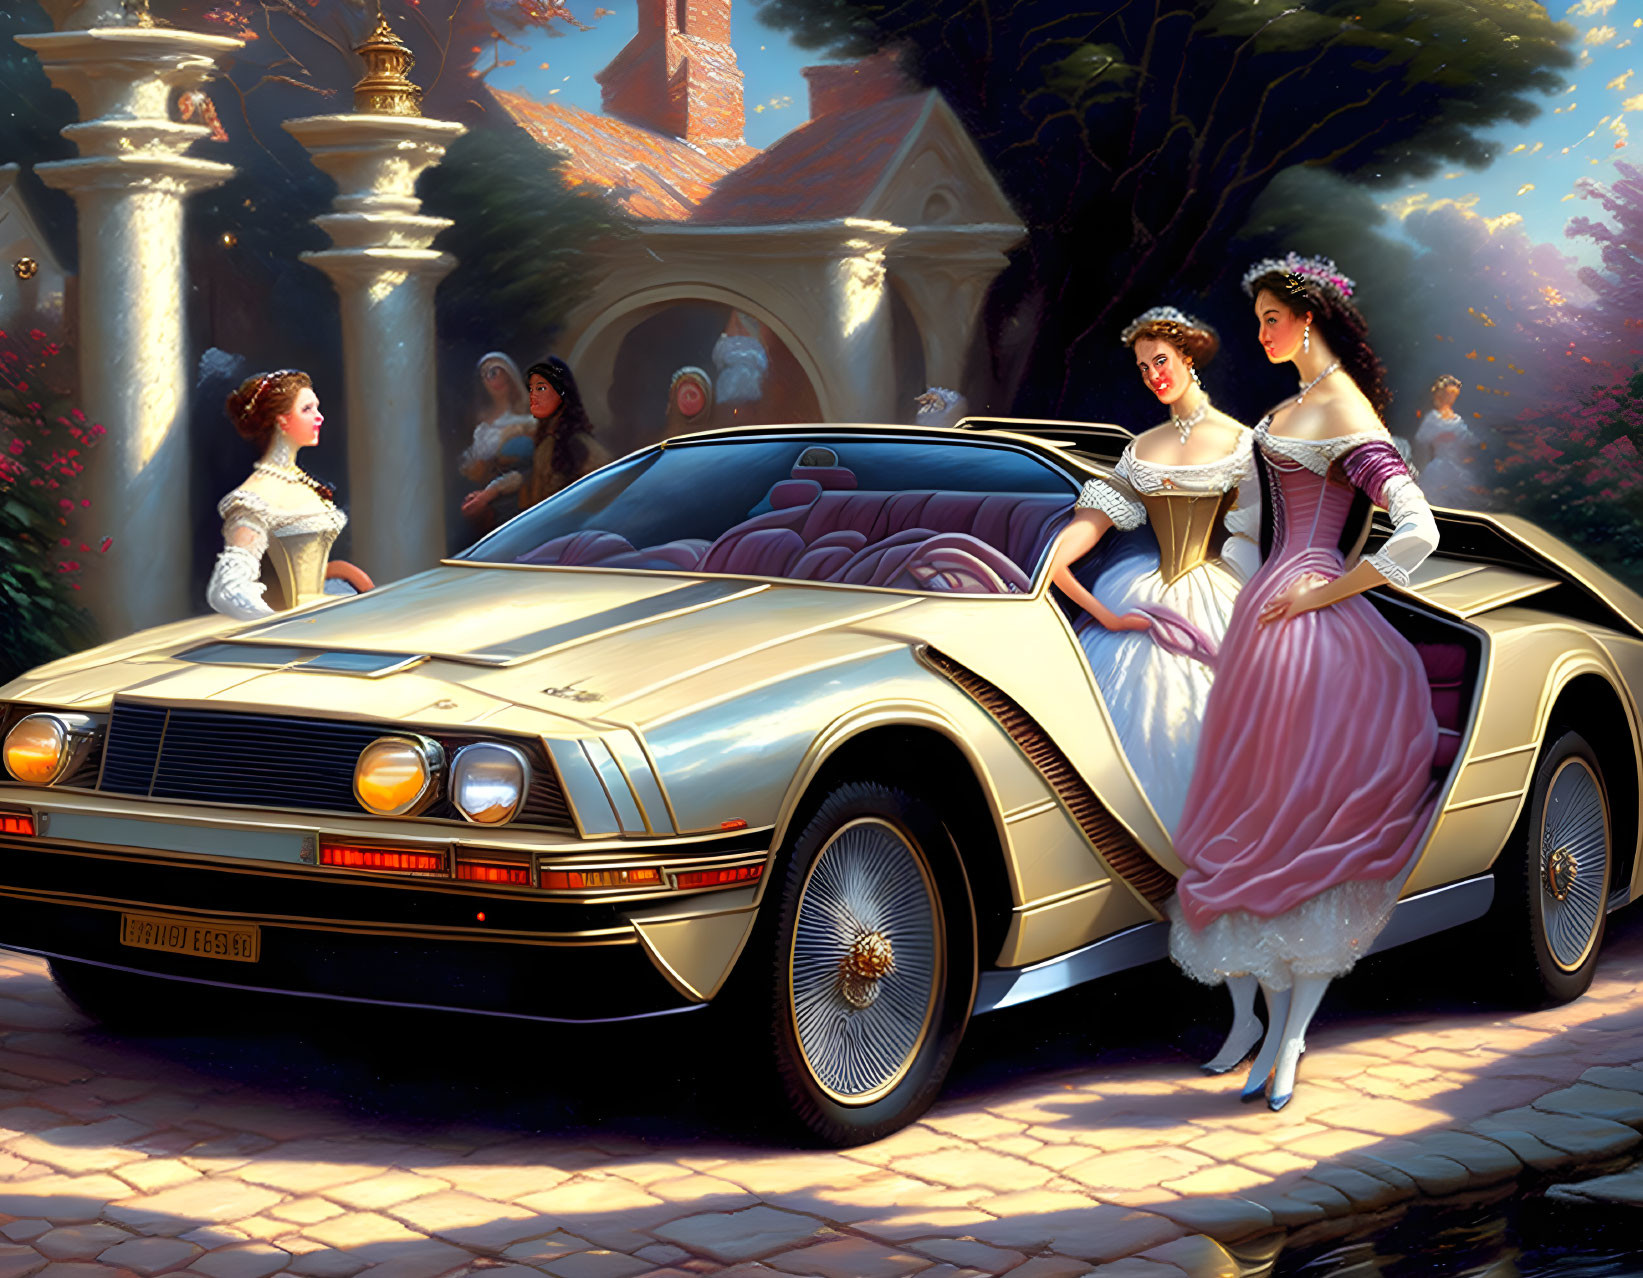 Elegantly Dressed Women in Historical Attire with Futuristic Golden Car